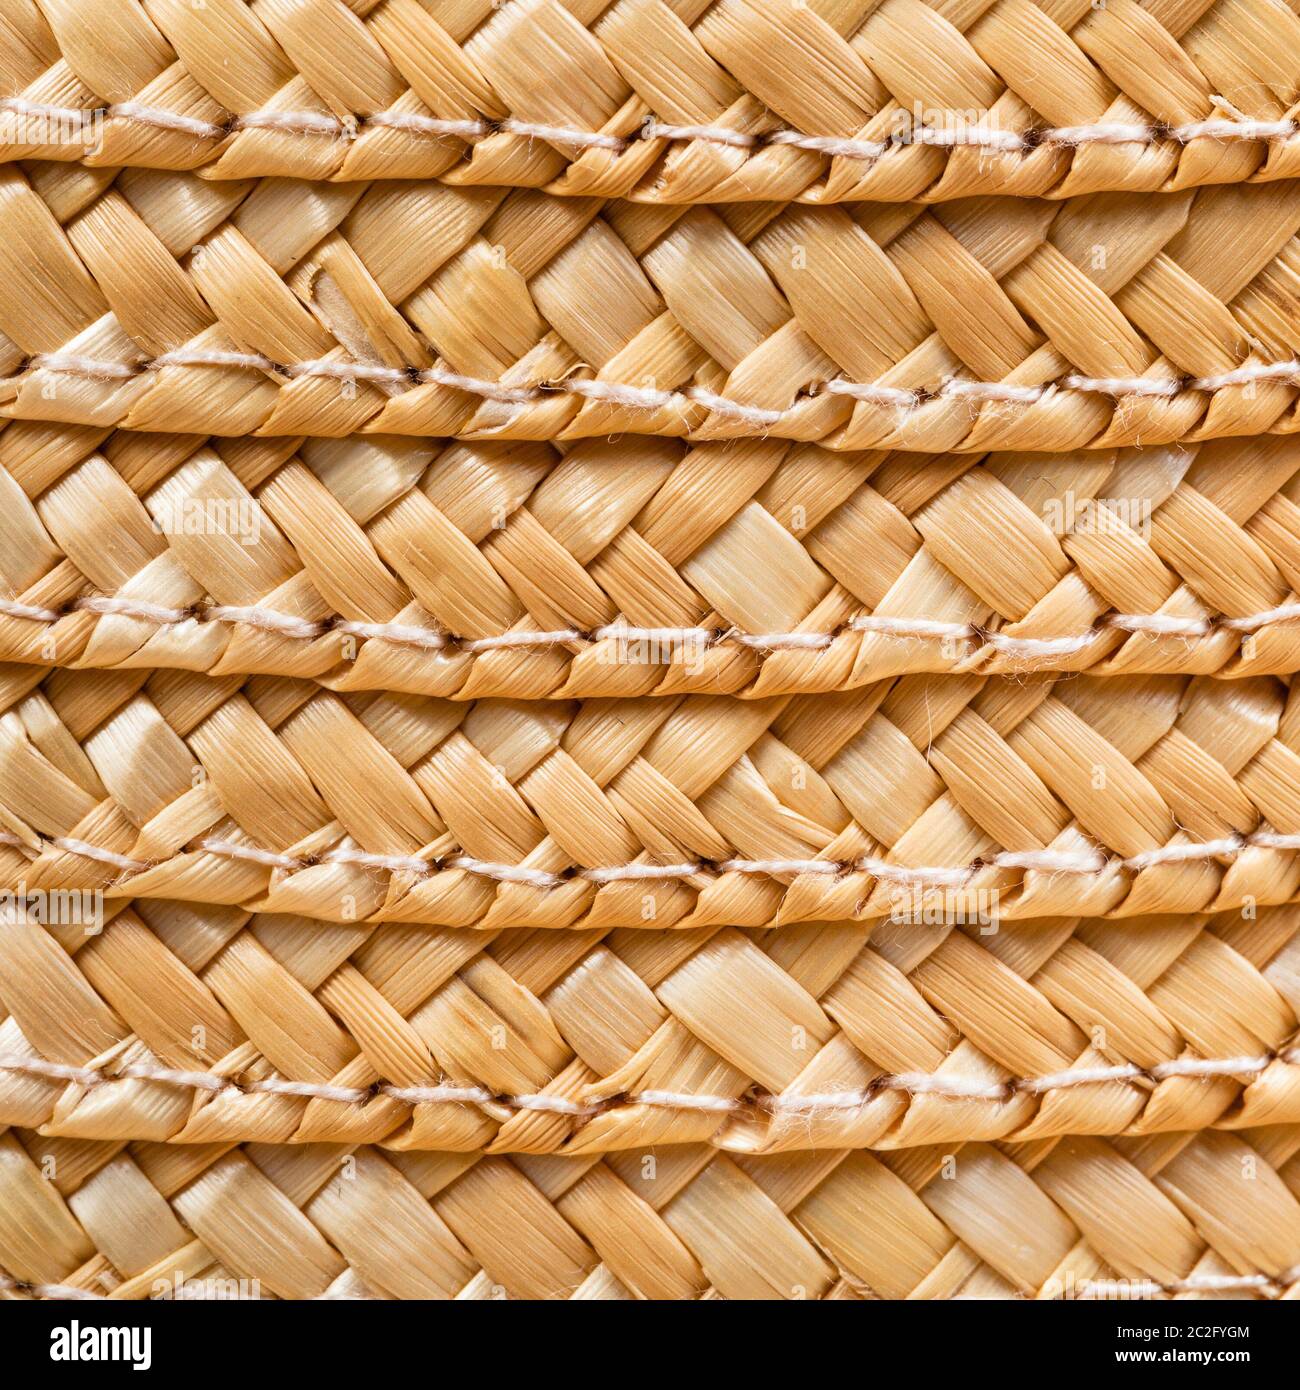 textile square background - texture of stitched summer straw hat from interwoven raffia fibers close up Stock Photo